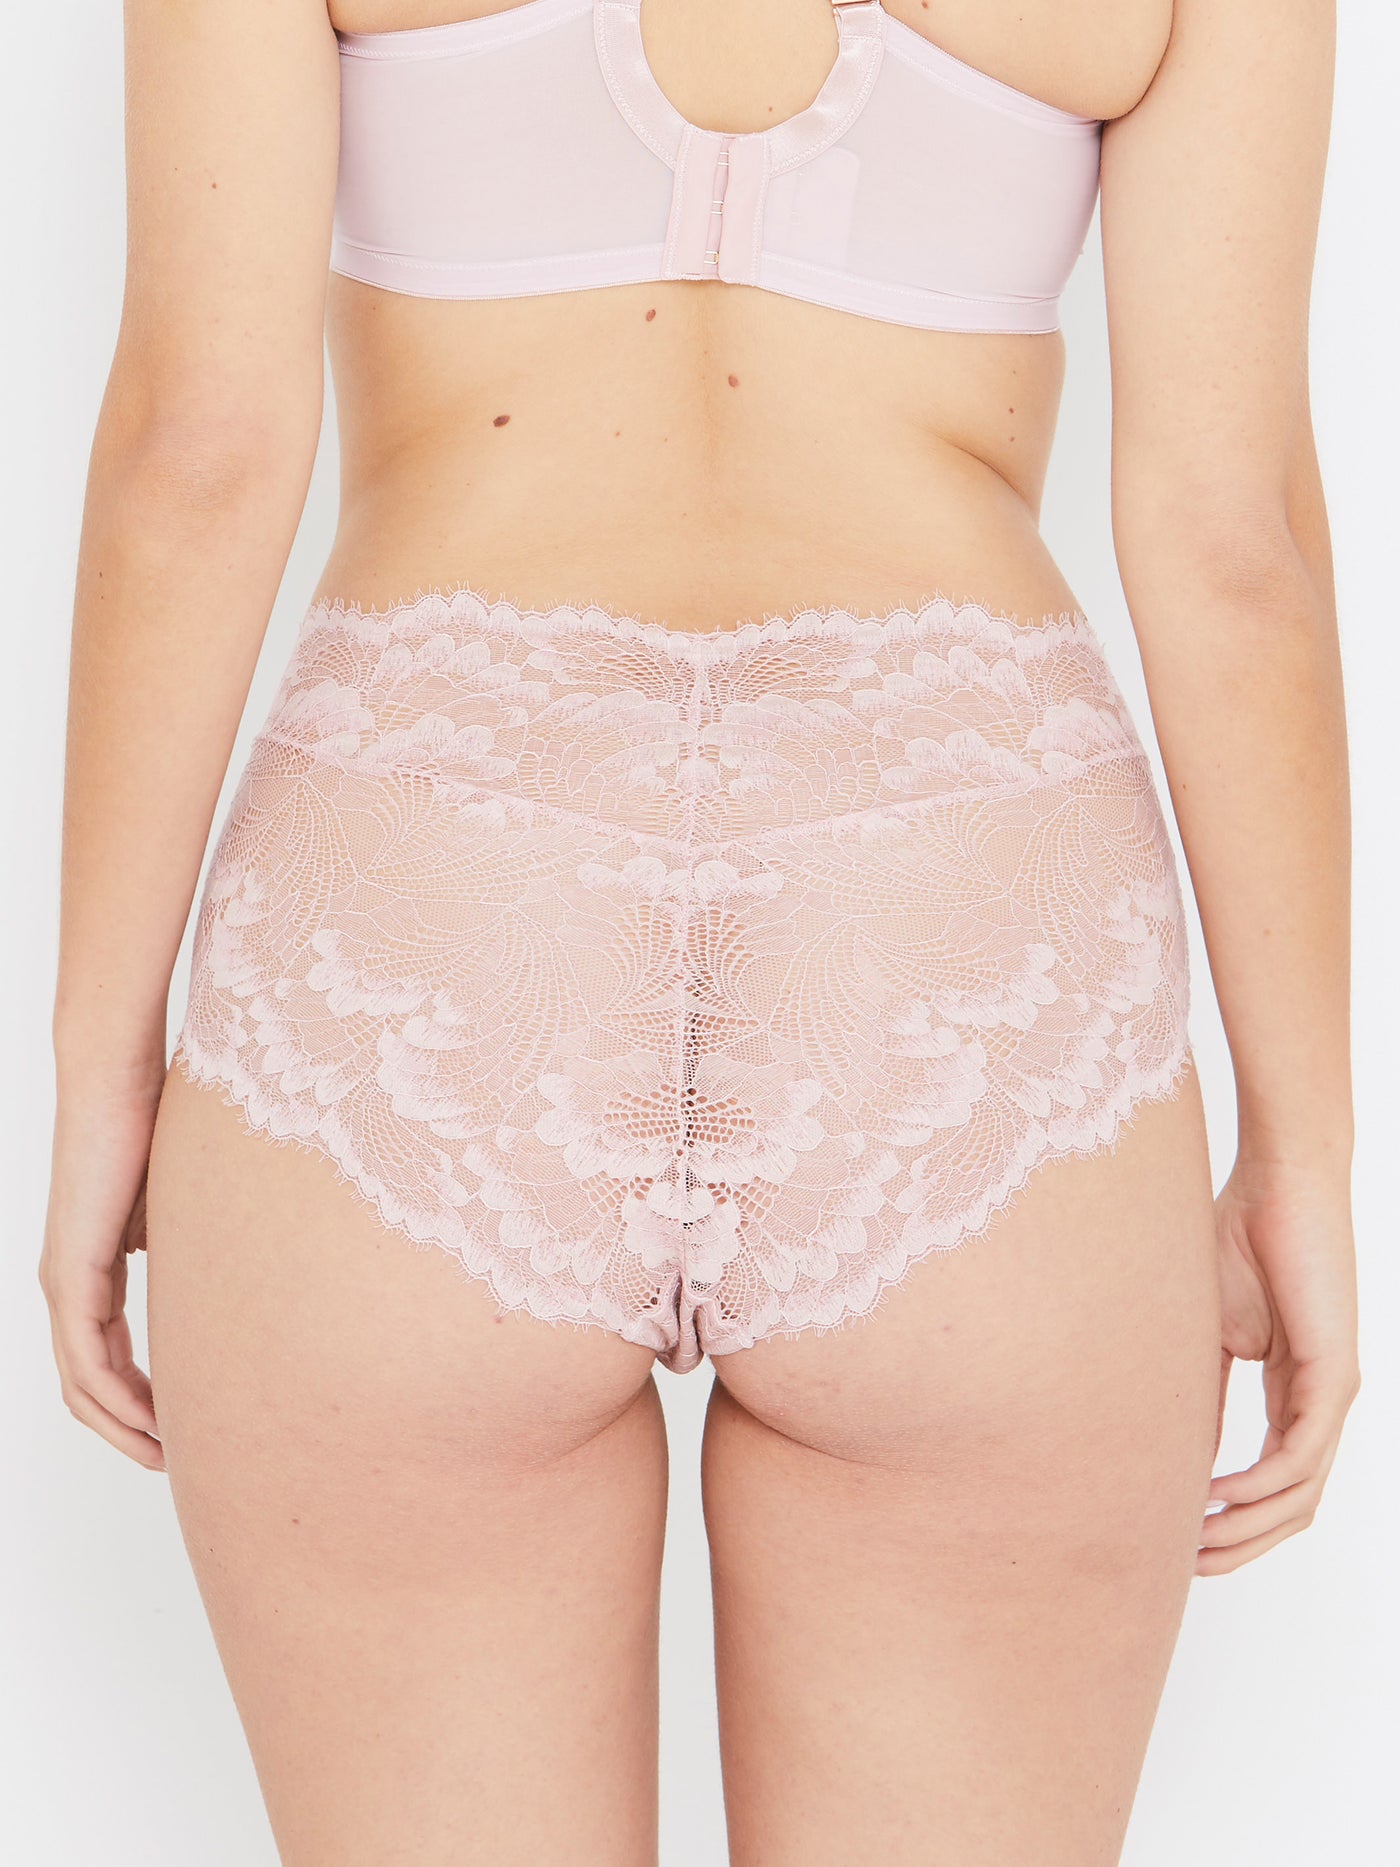 Olivia rose stretch lace high waist knickers back view